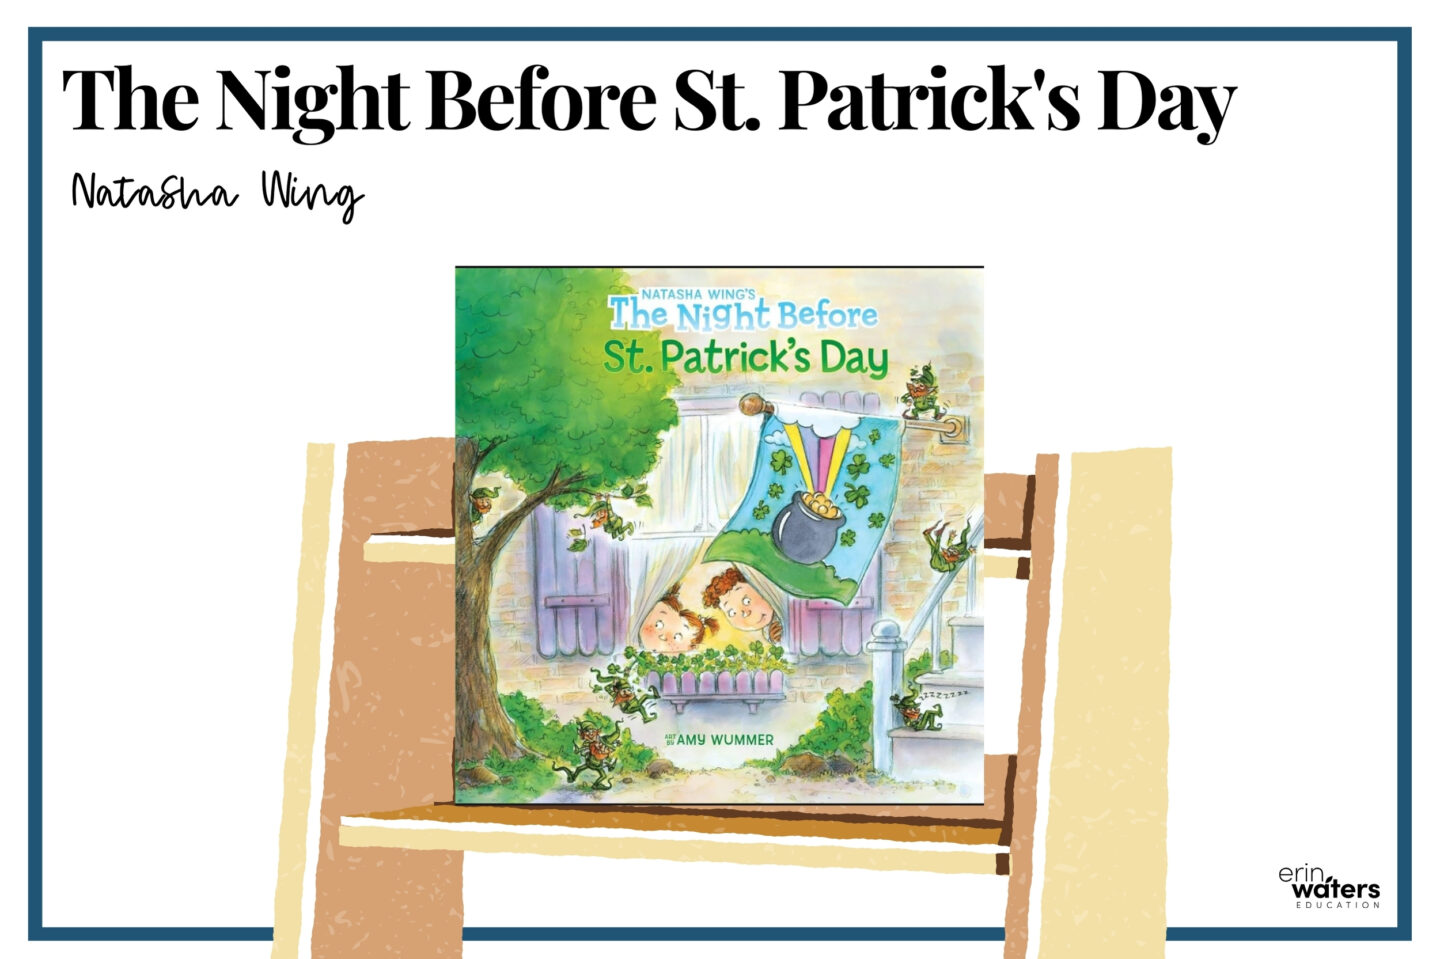 st. patrick's day books blog post image depicting the cover image of "The Night Before St. Patrick's Day" on a bookshelf